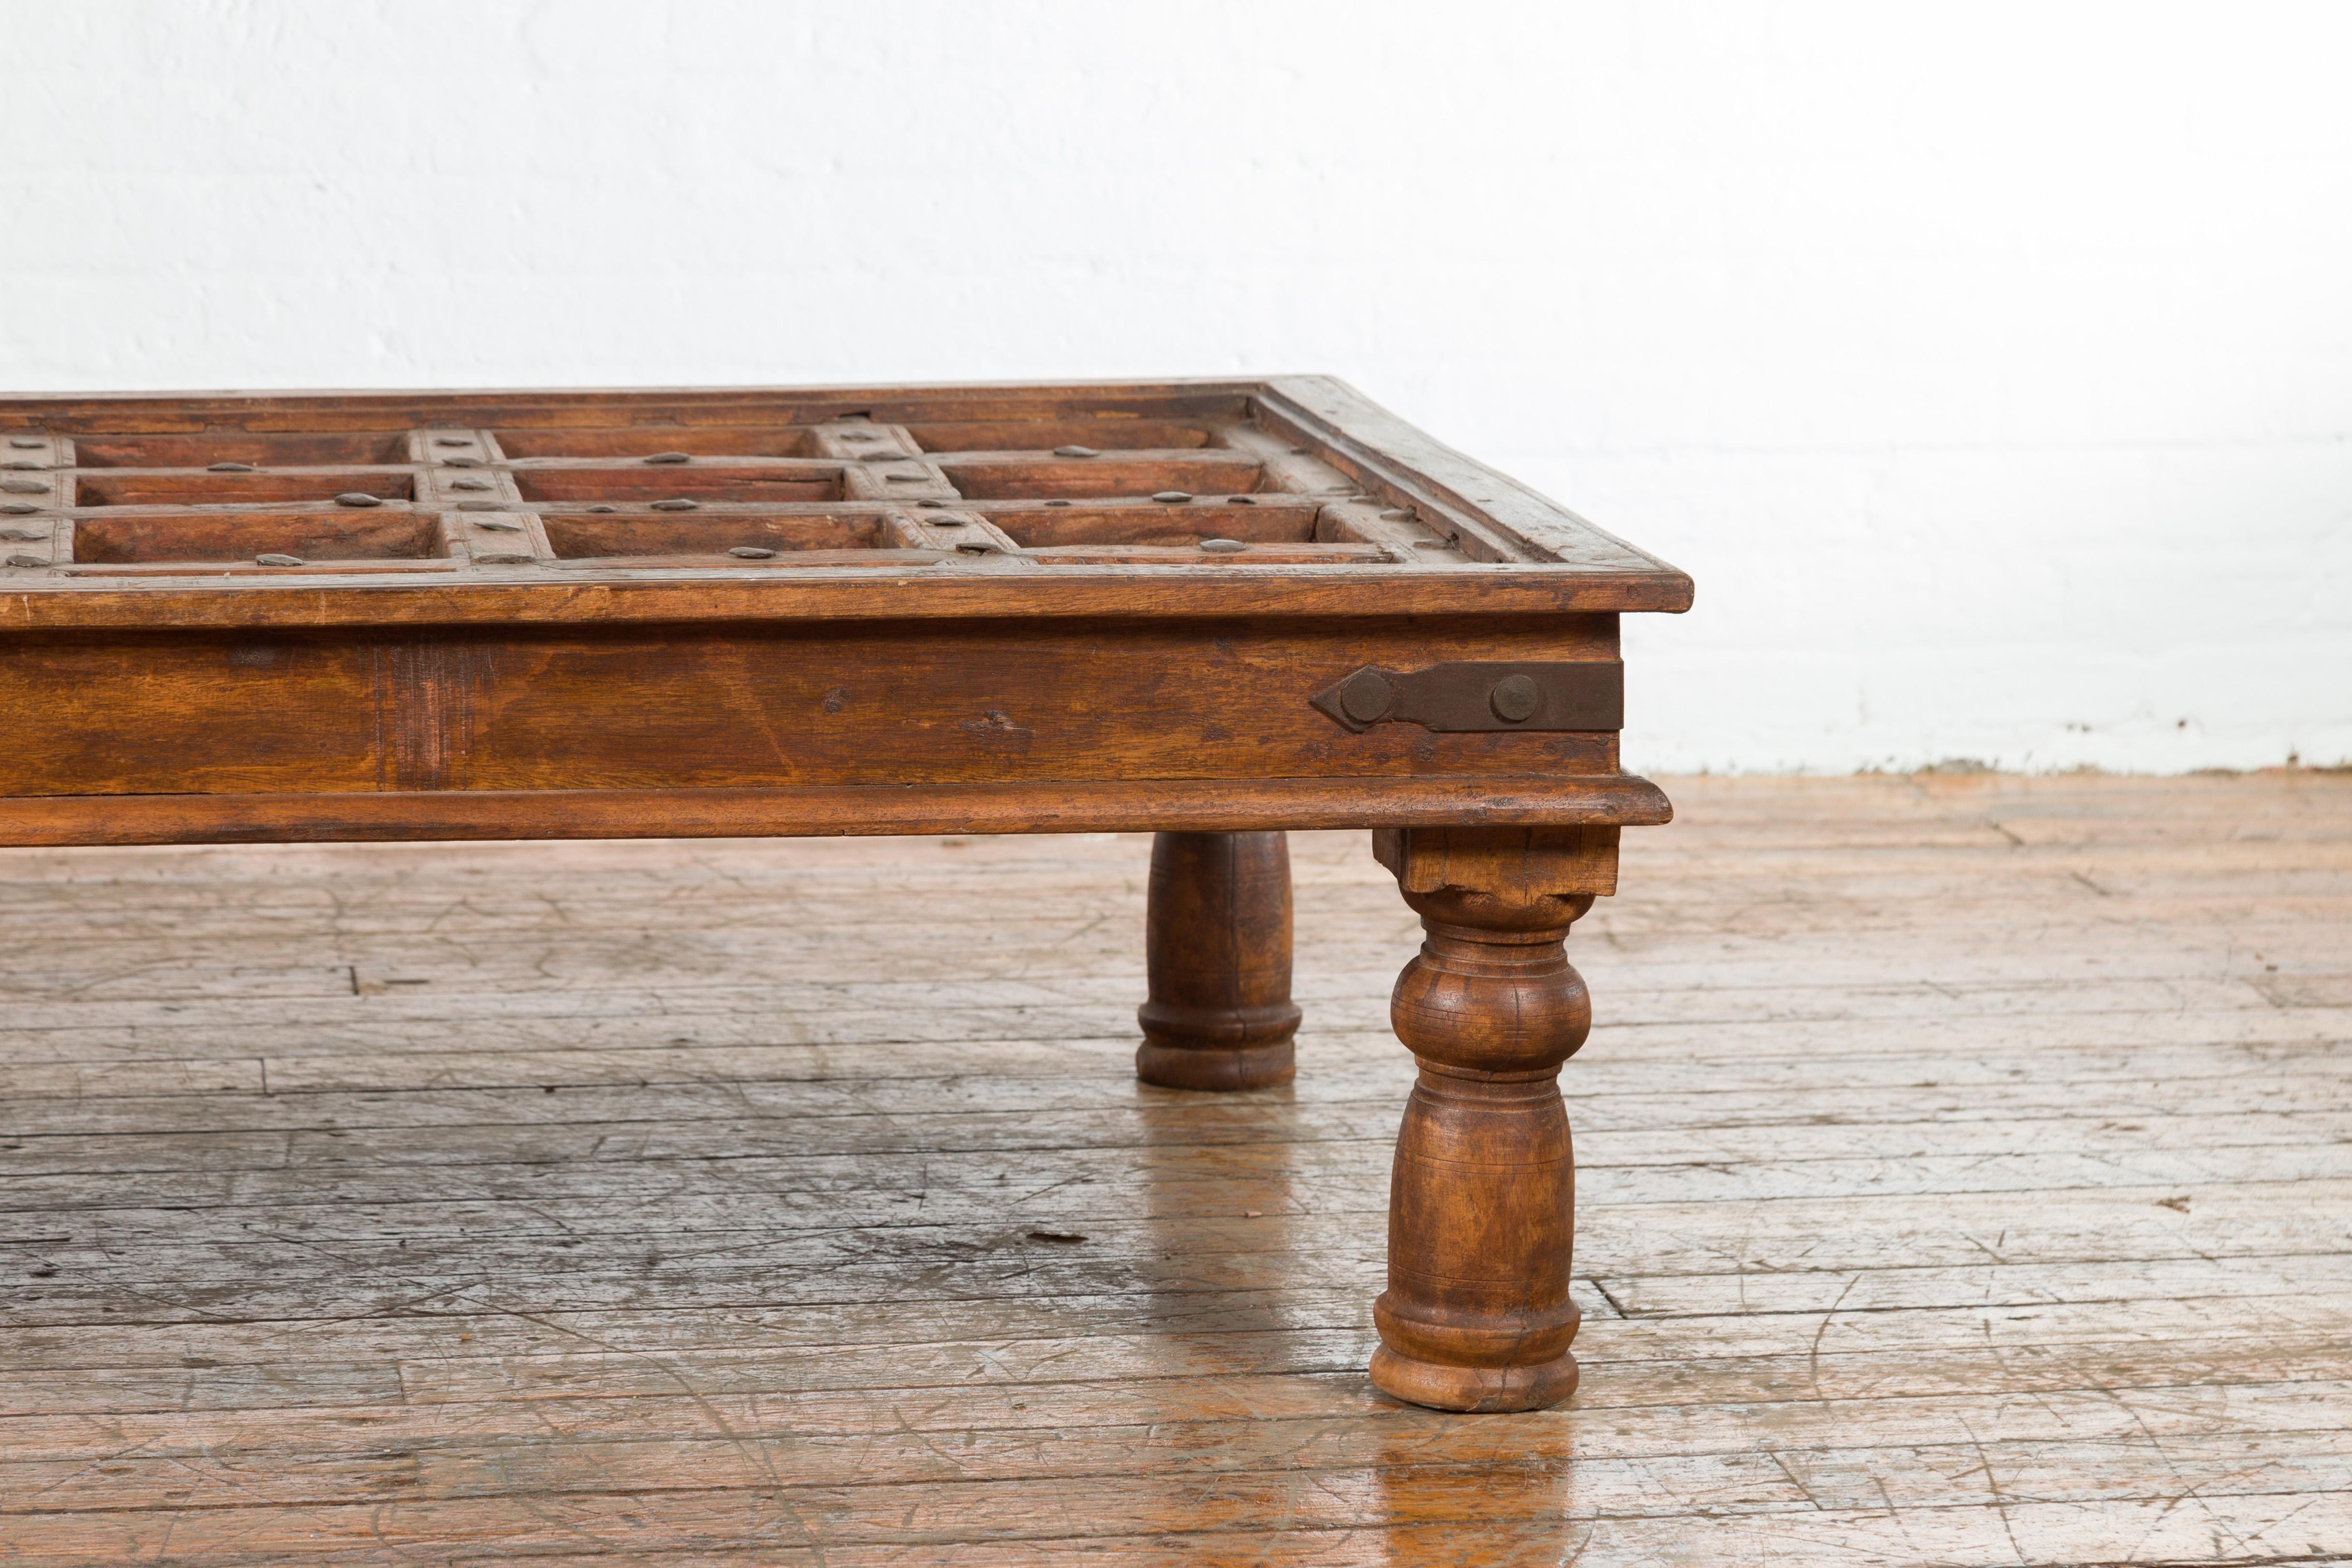 Indian 19th Century Paneled Door with Iron Accents Turned into a Coffee Table 2